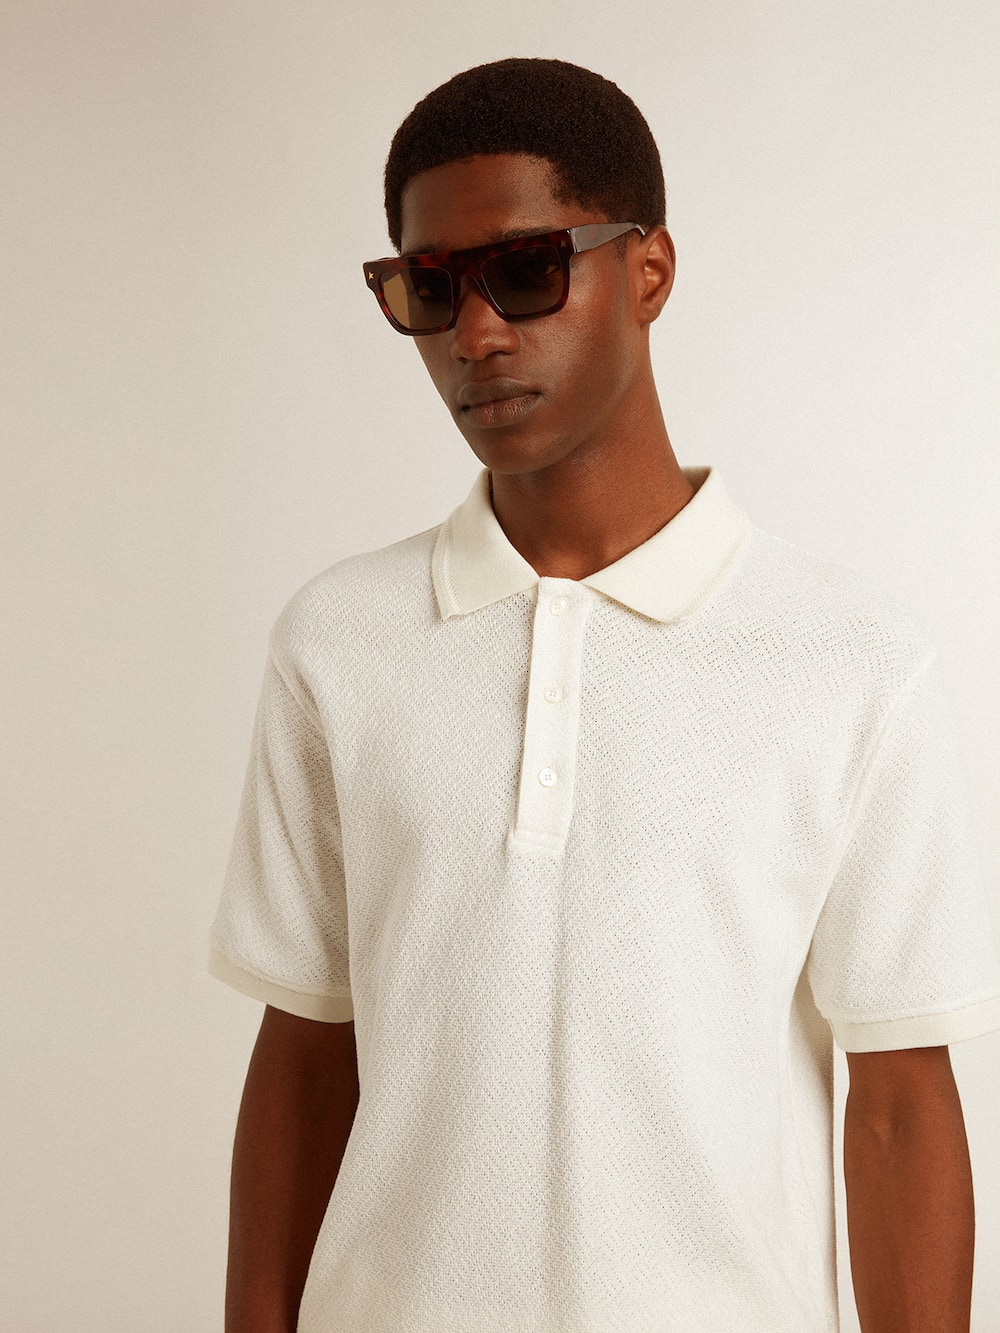 Golden Goose - Men's polo shirt in white cotton with mother-of-pearl buttons in 